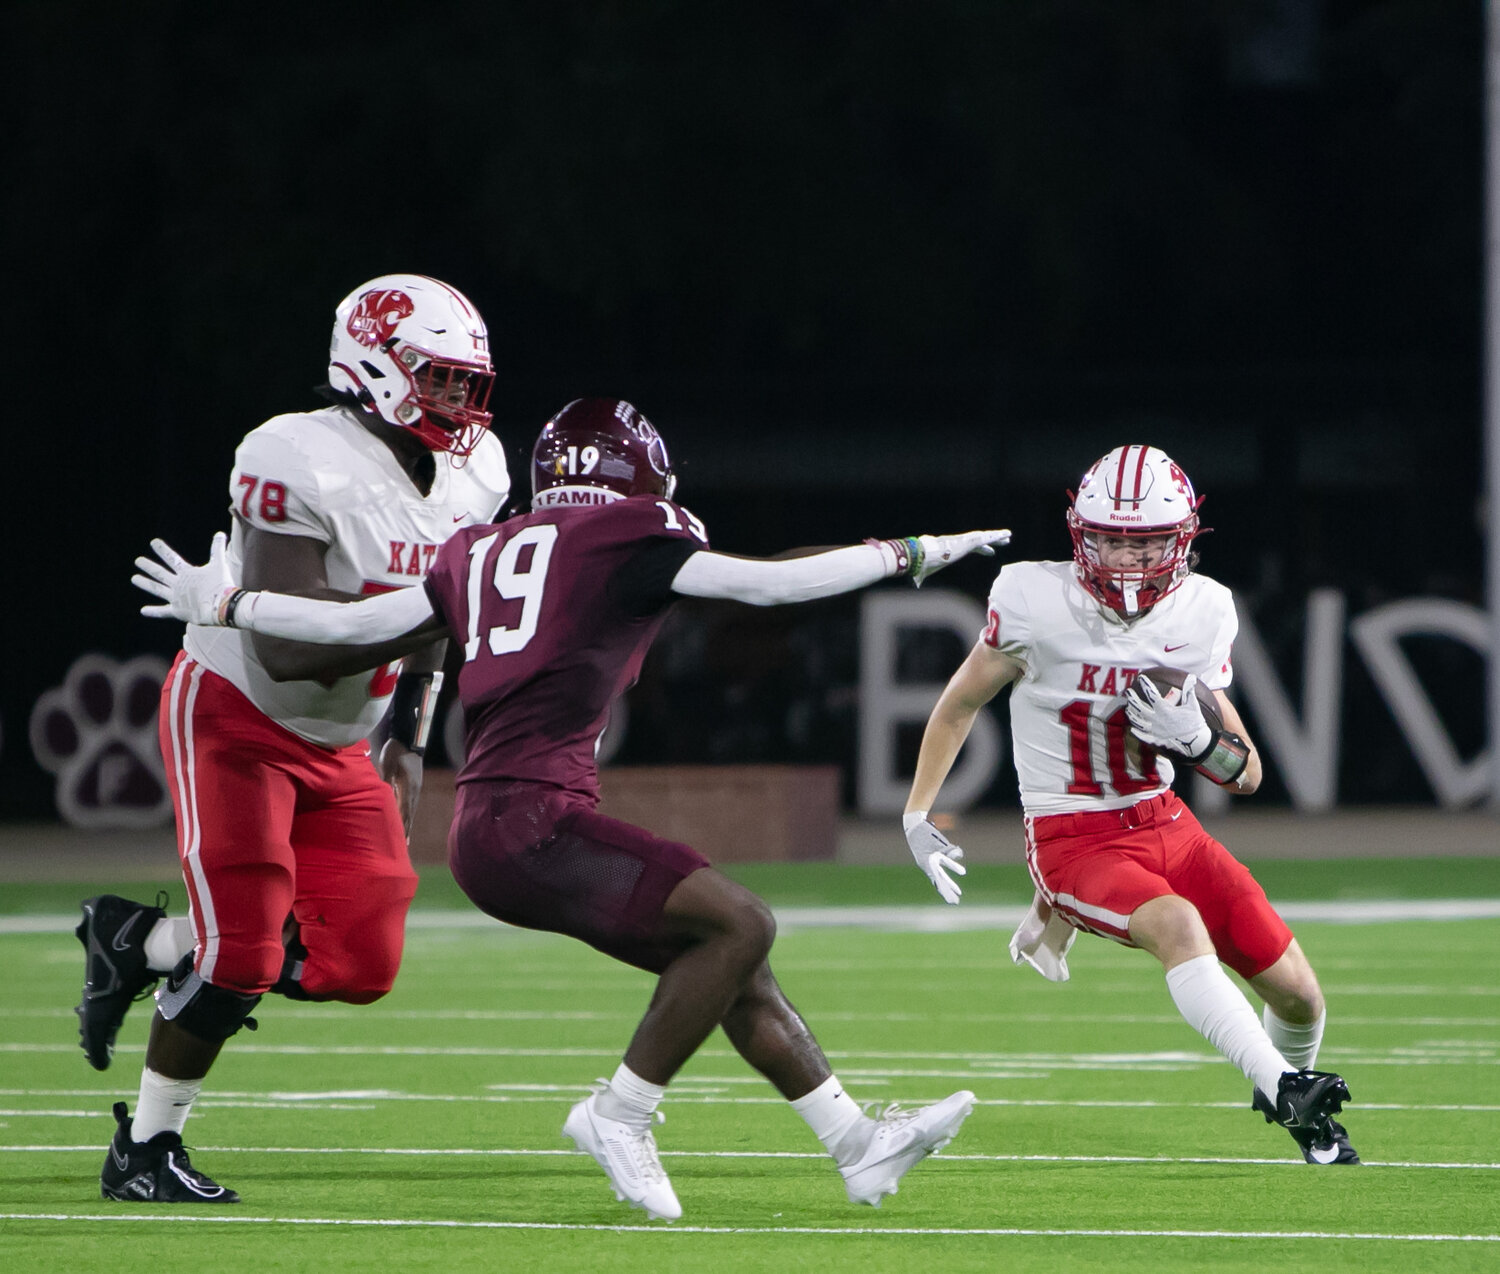 Oliver Ginn cuts upfield during Friday's area round game between Katy and Cy-Fair at the Berry Center in Cypress.